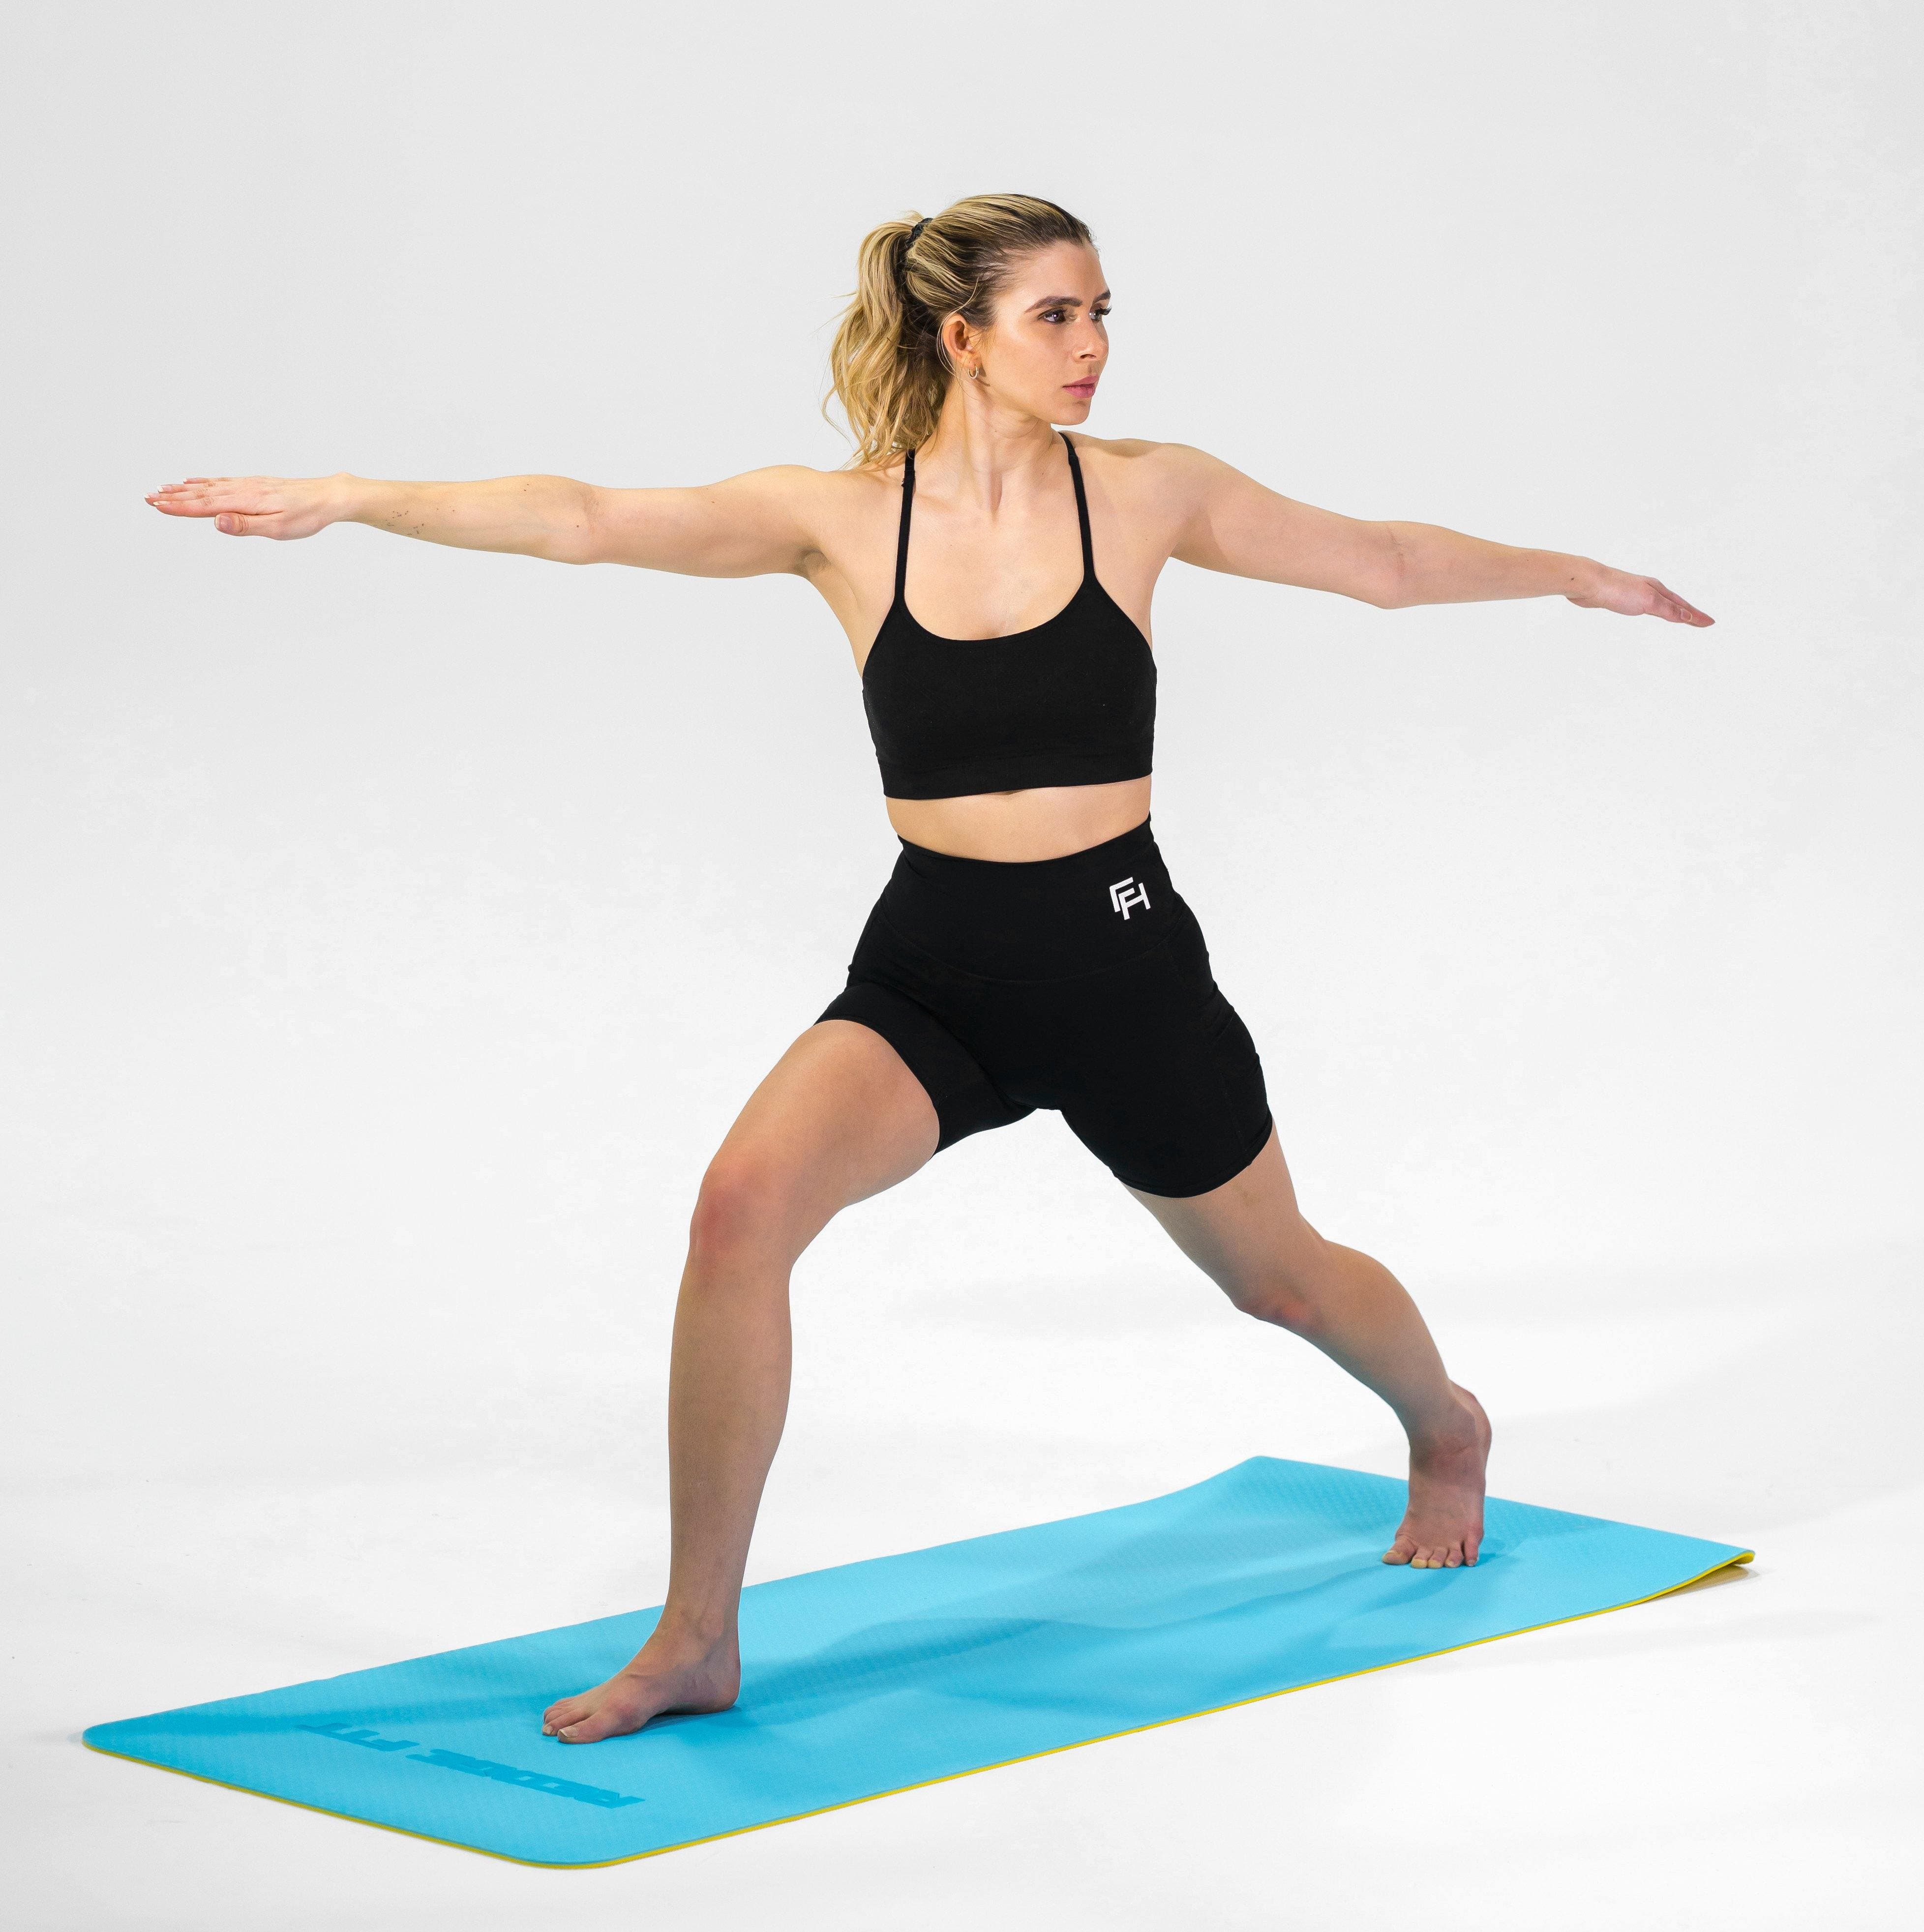 Woman modeling the Redge Fit Core Focus Yoga Mat Available at https://www.getredge.com/products/core-focus-all-in-one-pack